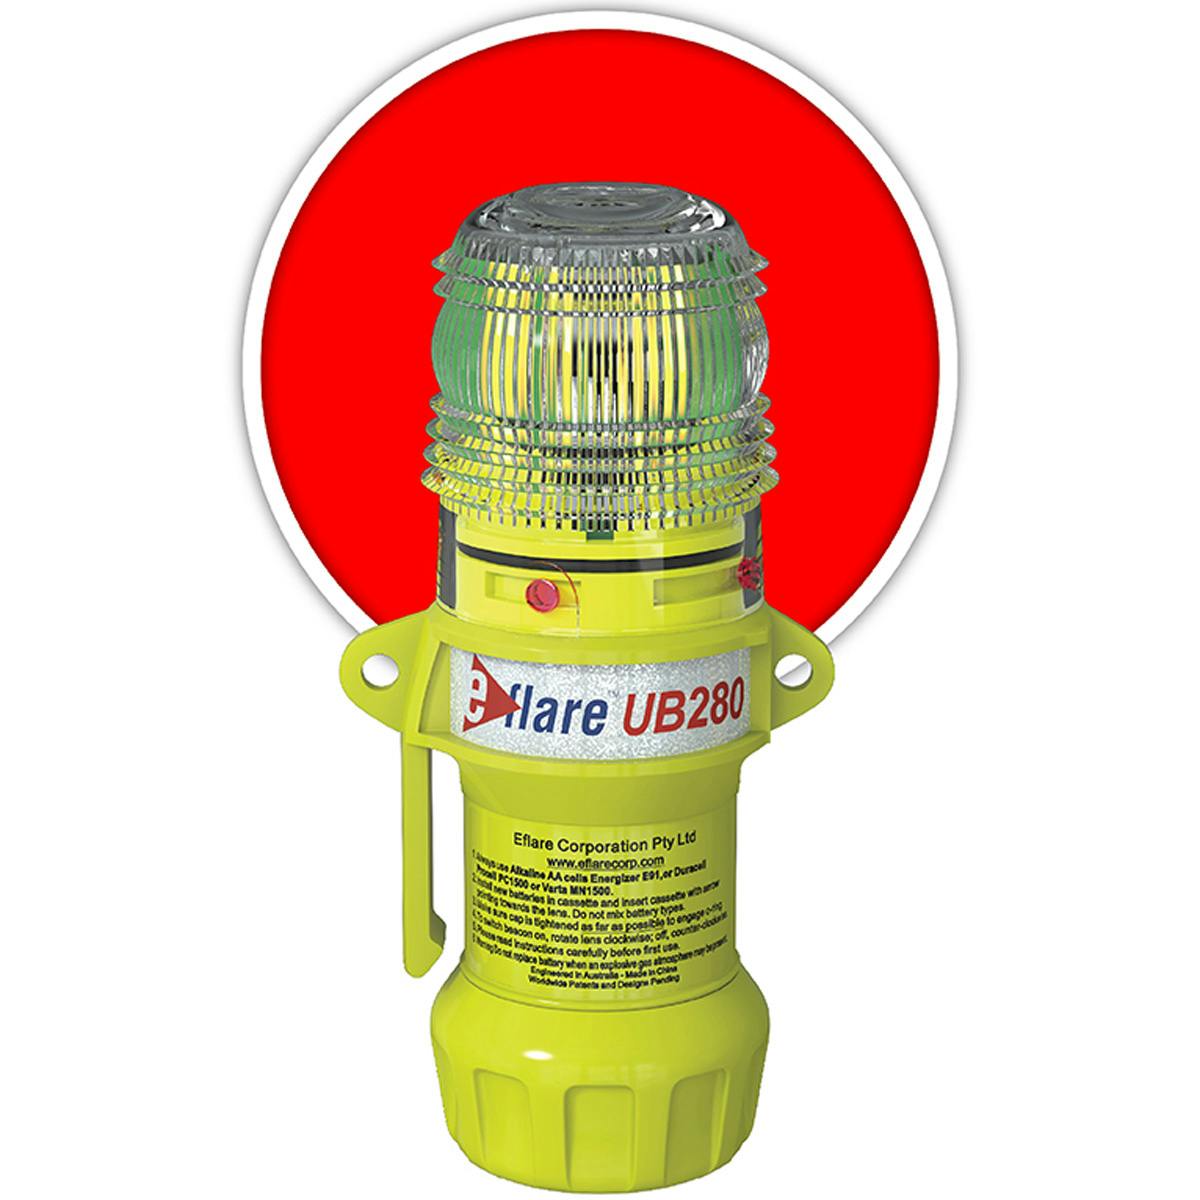 6" Safety & Emergency Beacon - Flashing / Steady-On Red, Red (939-UB280-R) - 6_0